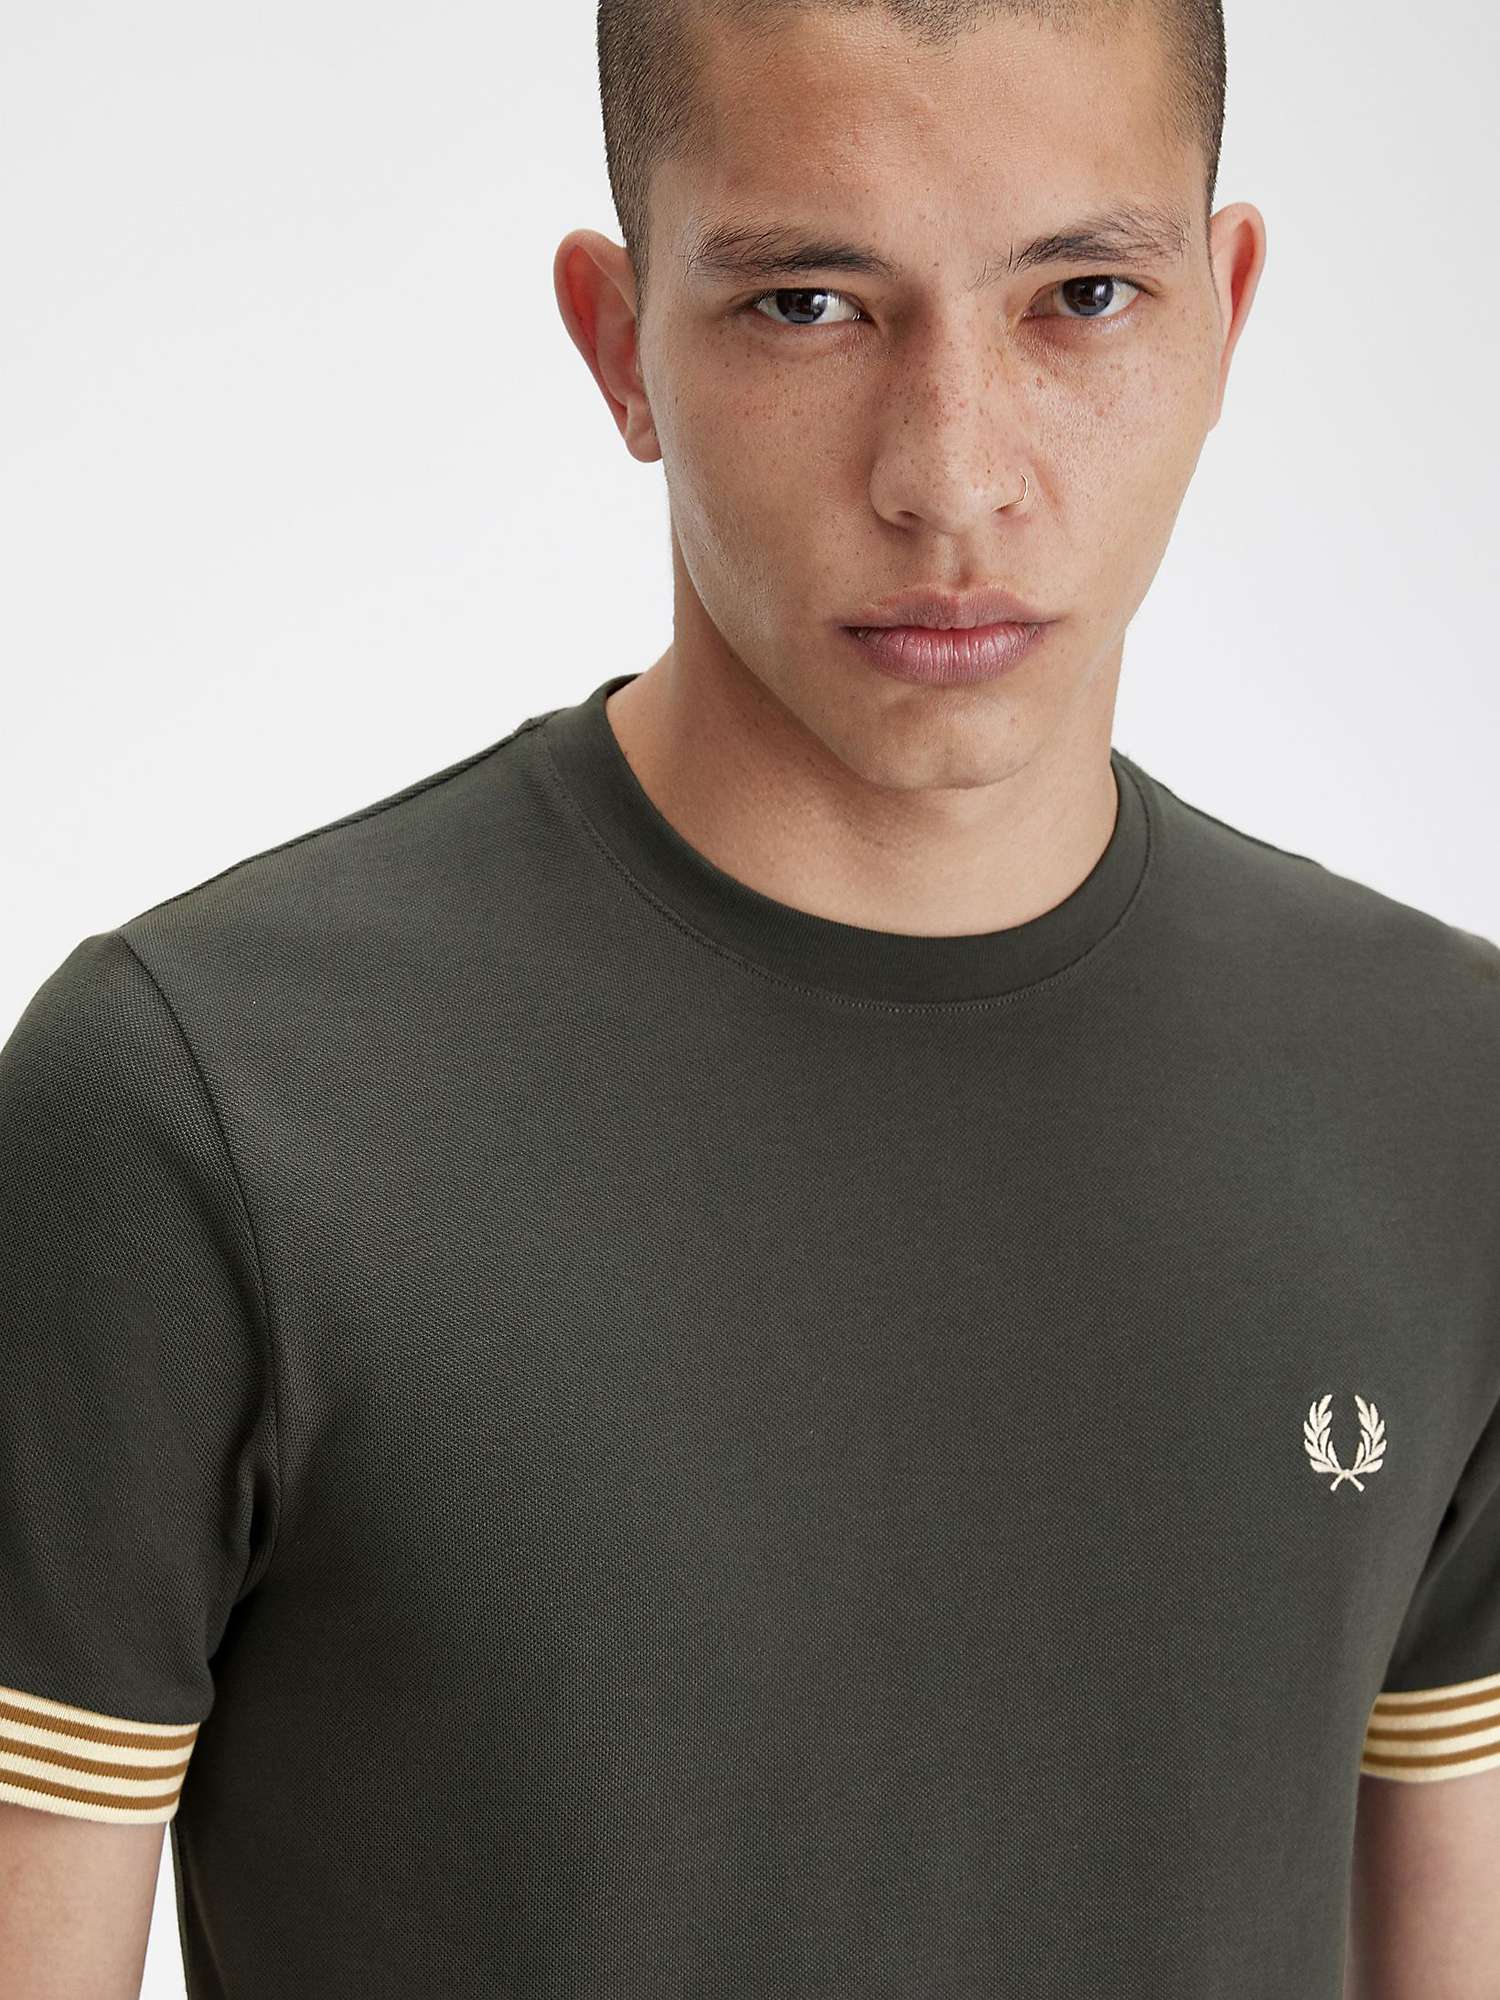 Buy Fred Perry Stripe Cuff T-Shirt, Green/Multi Online at johnlewis.com